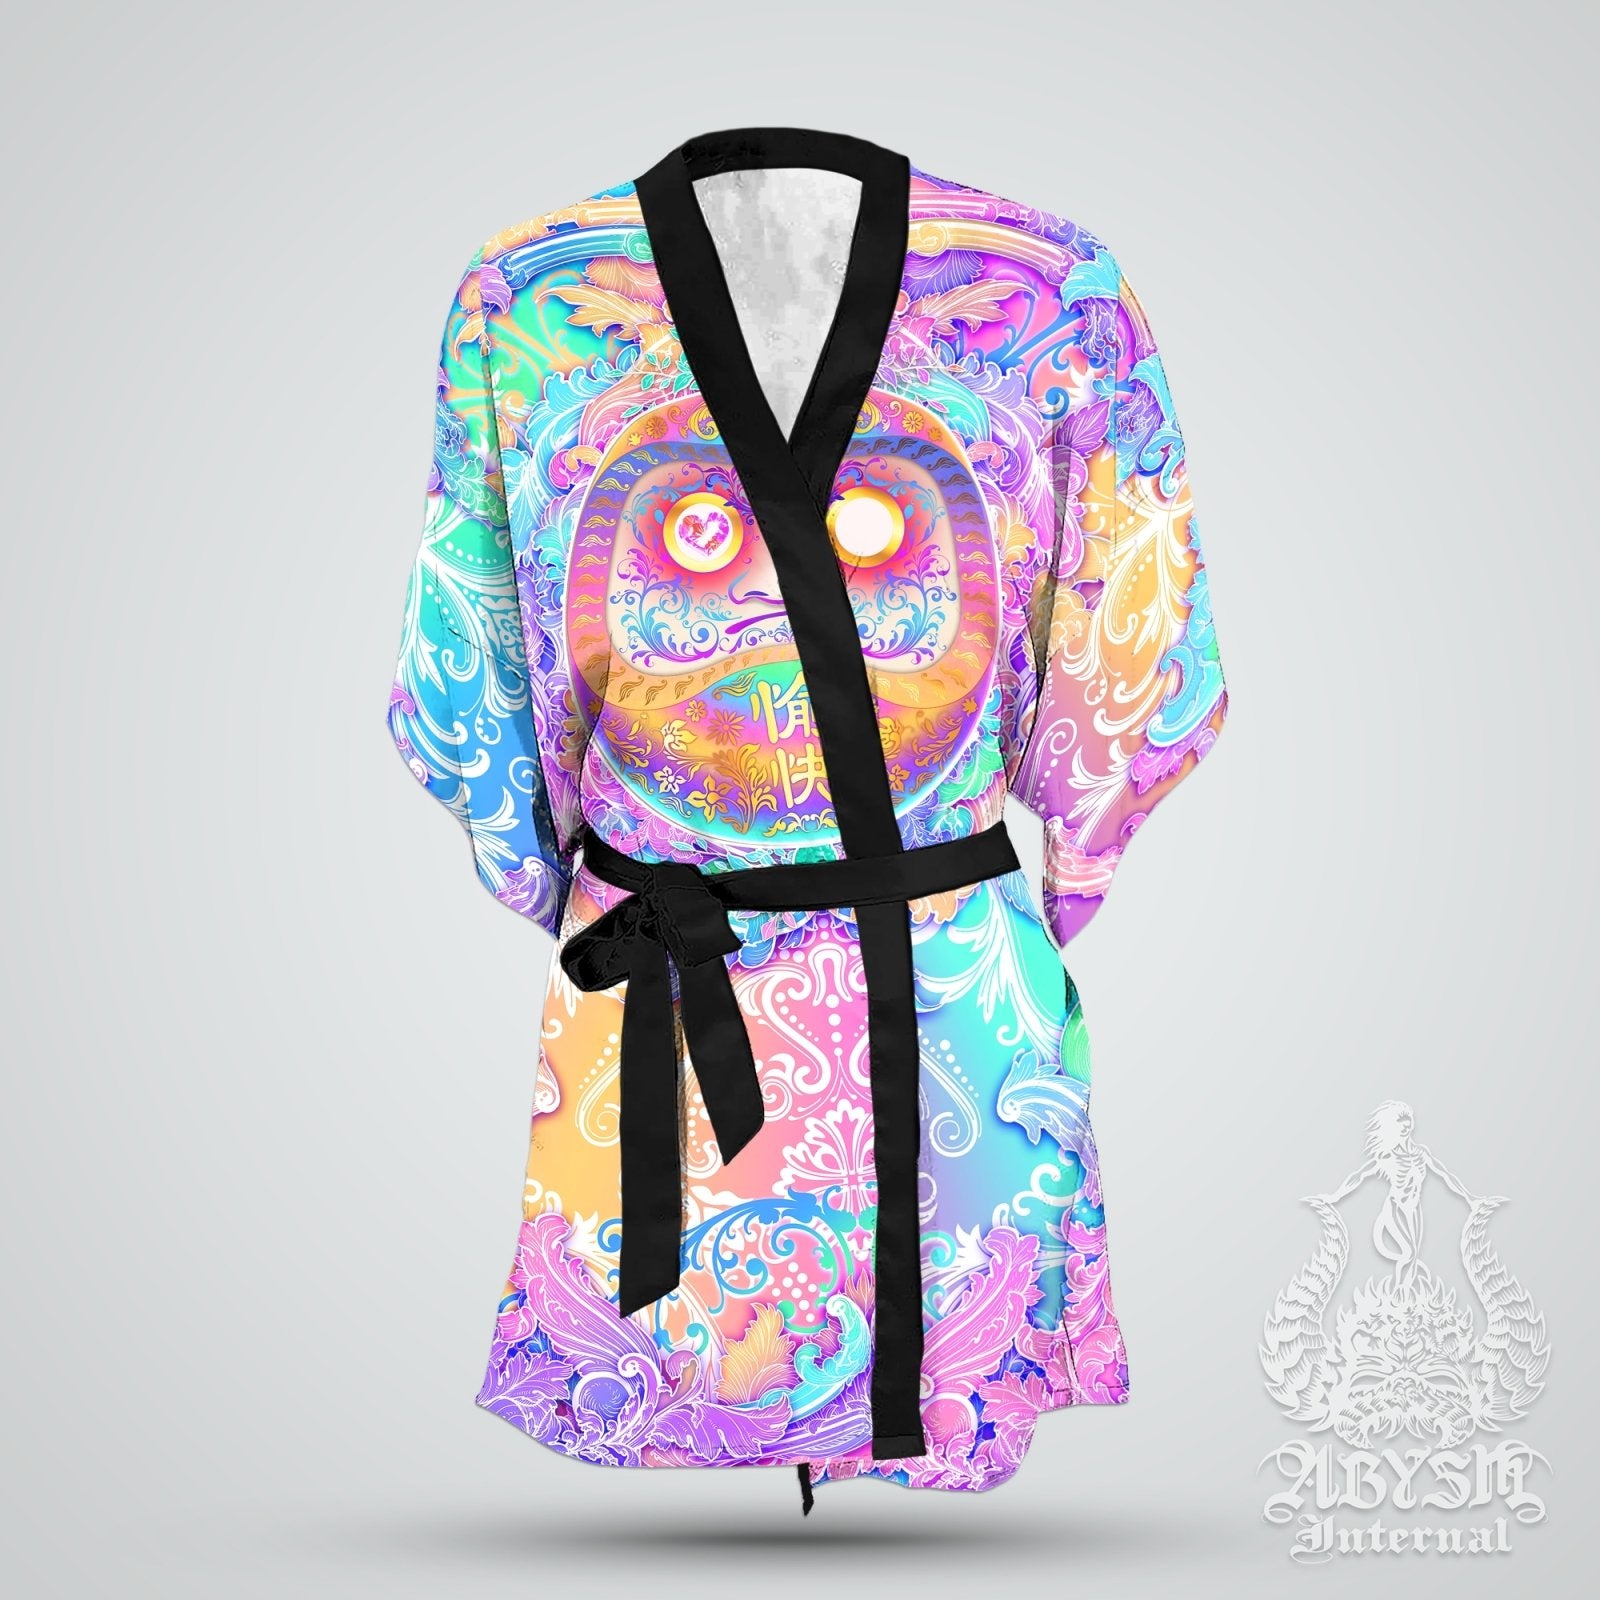 Daruma Cover Up, Beach Rave Outfit, Party Kimono, Japanese Summer Festival Robe, Aesthetic Indie and Alternative Clothing, Unisex - Holographic Pastel - Abysm Internal